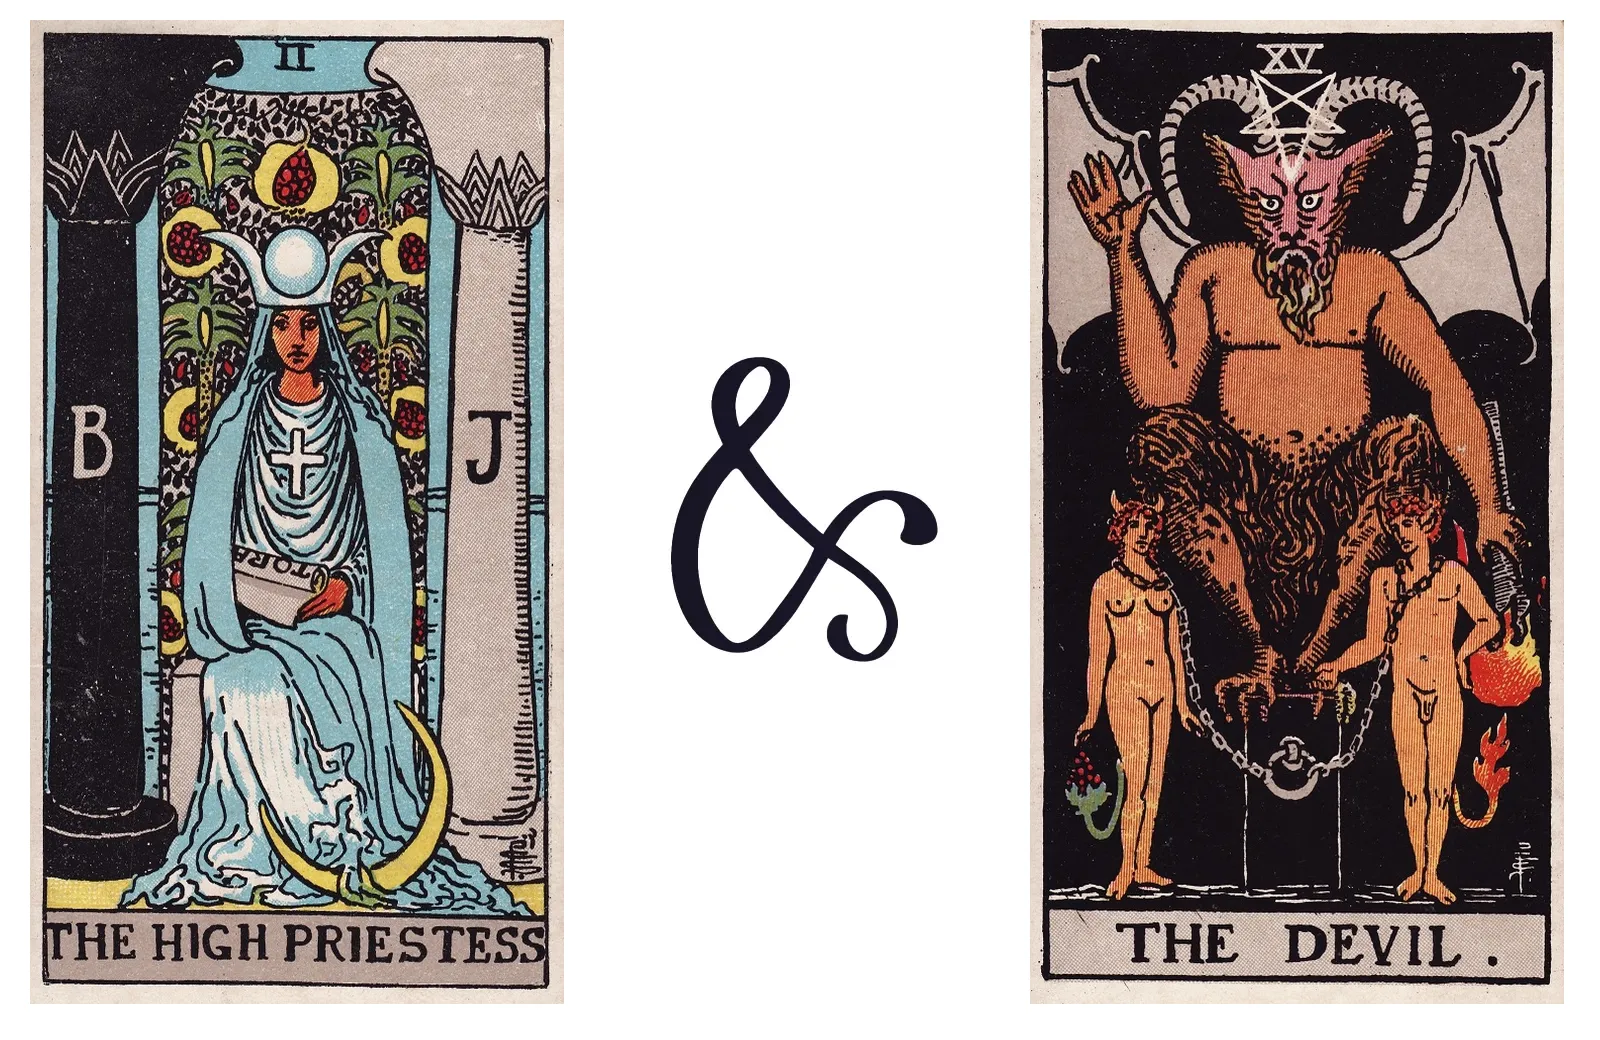 The High Priestess and The Devil